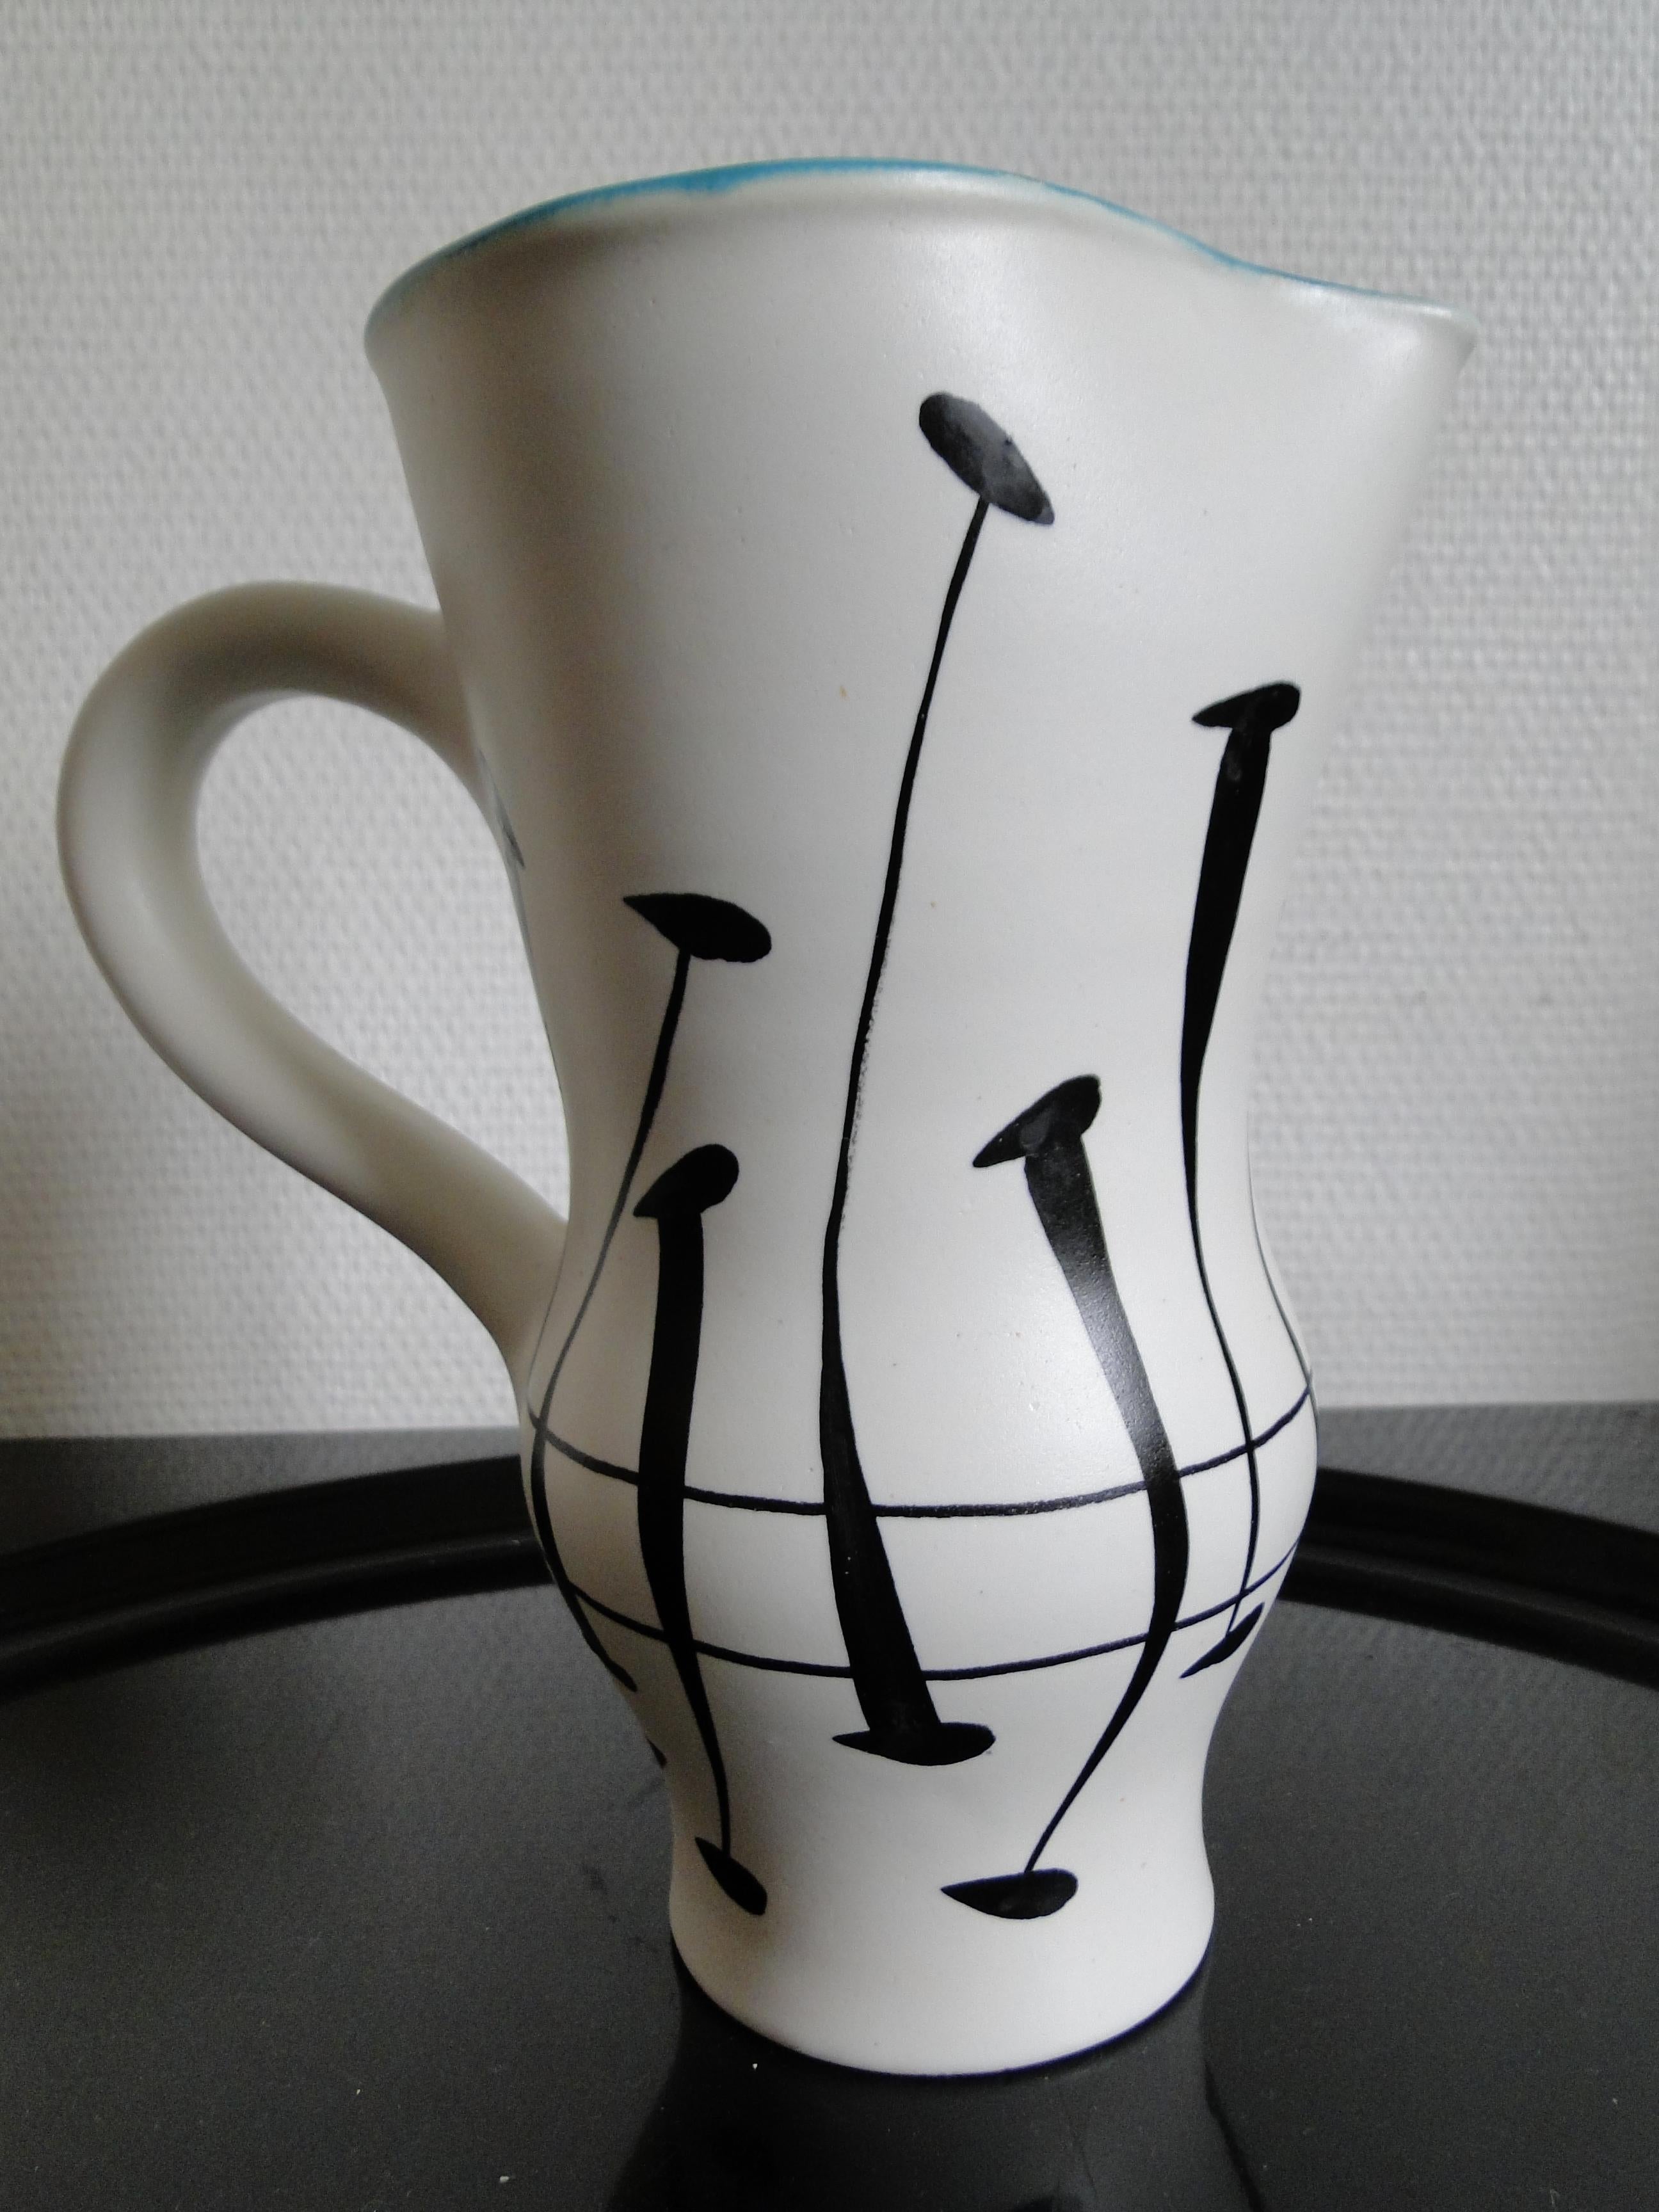 A large ceramic pitcher or jug,
thick white enamel with black decoration.
Roger Capron,
Vallauris
France circa 1960.
Signed 